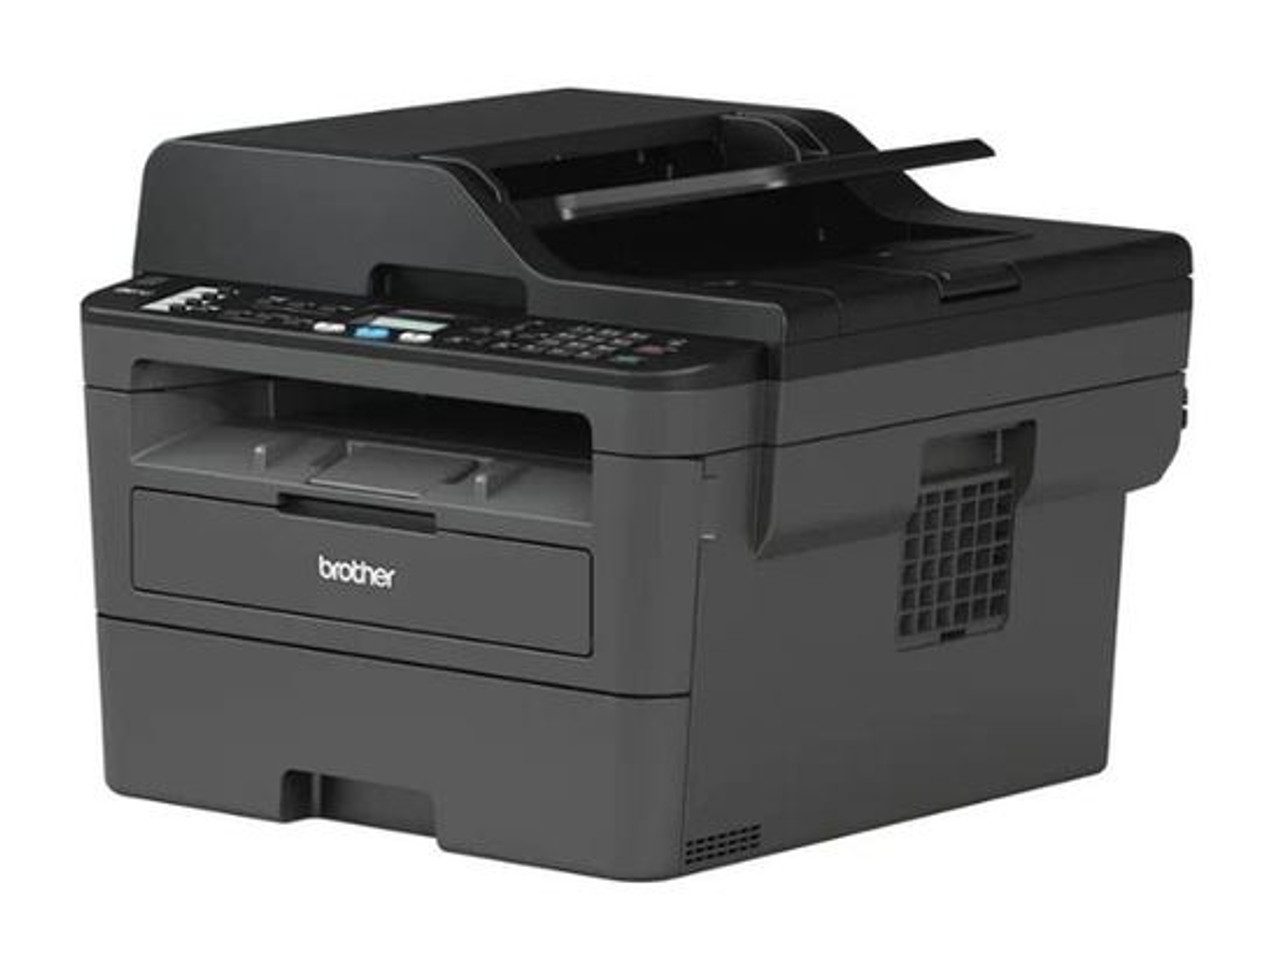 Brother Laser Printers For Sale Various Prices with New Toners